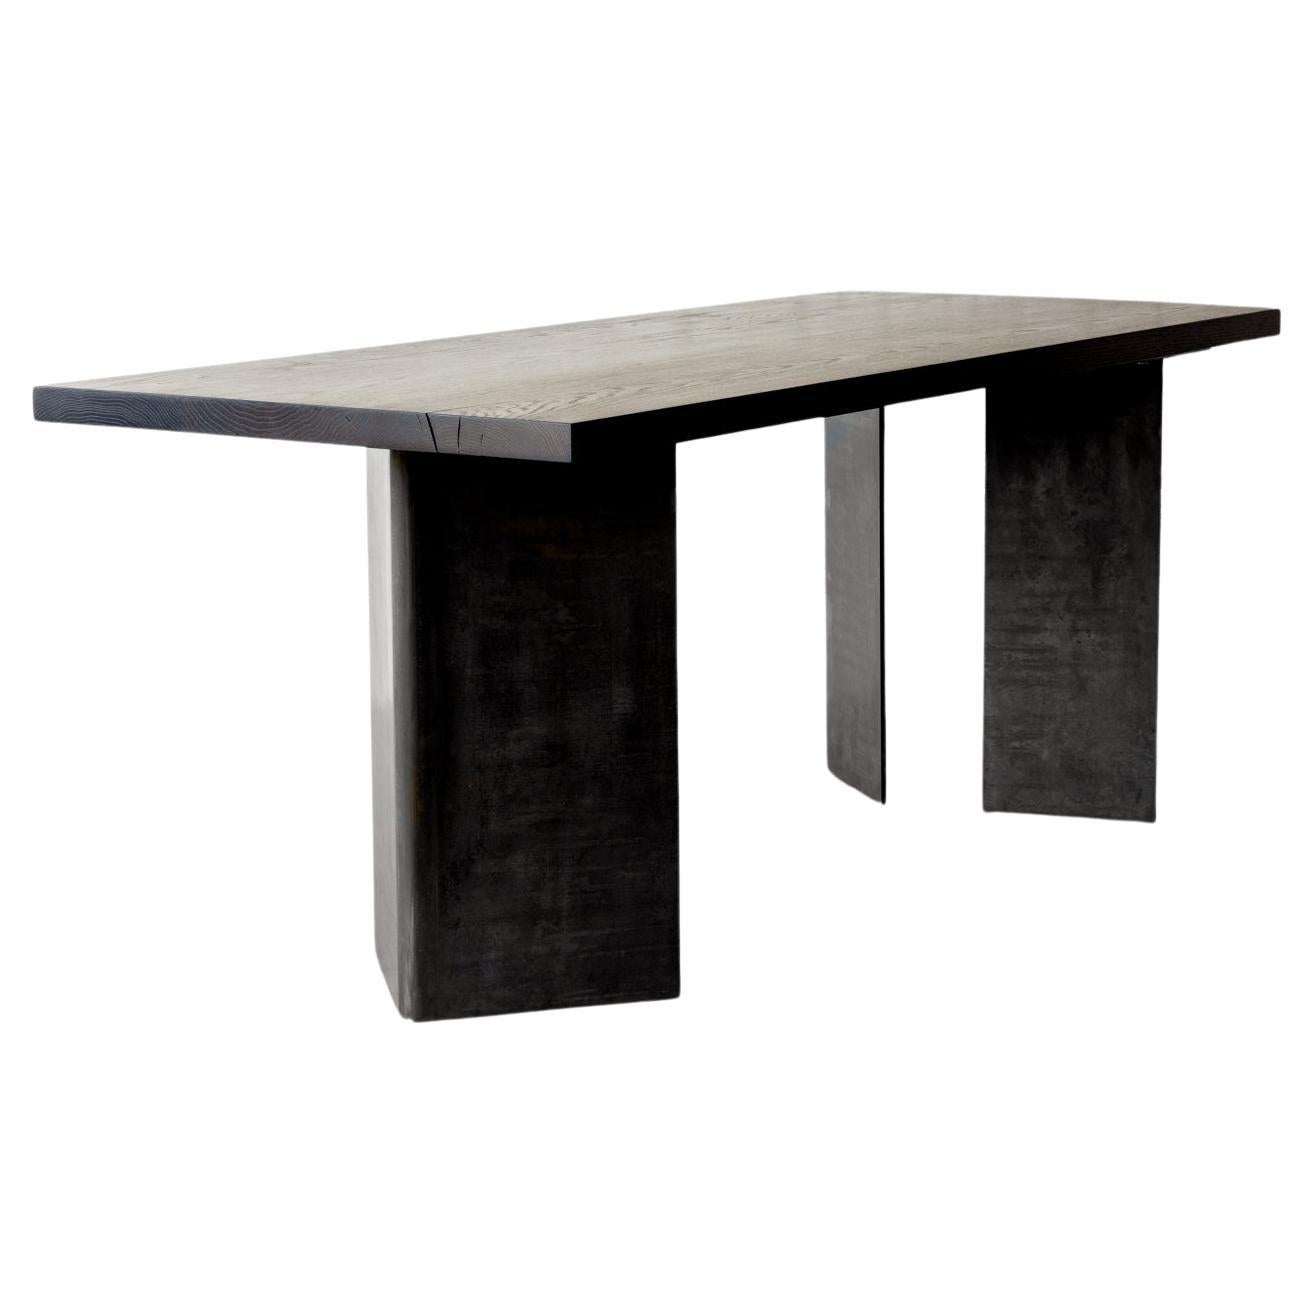 Tribal Blackened Oak and Steel Table by Autonomous Furniture